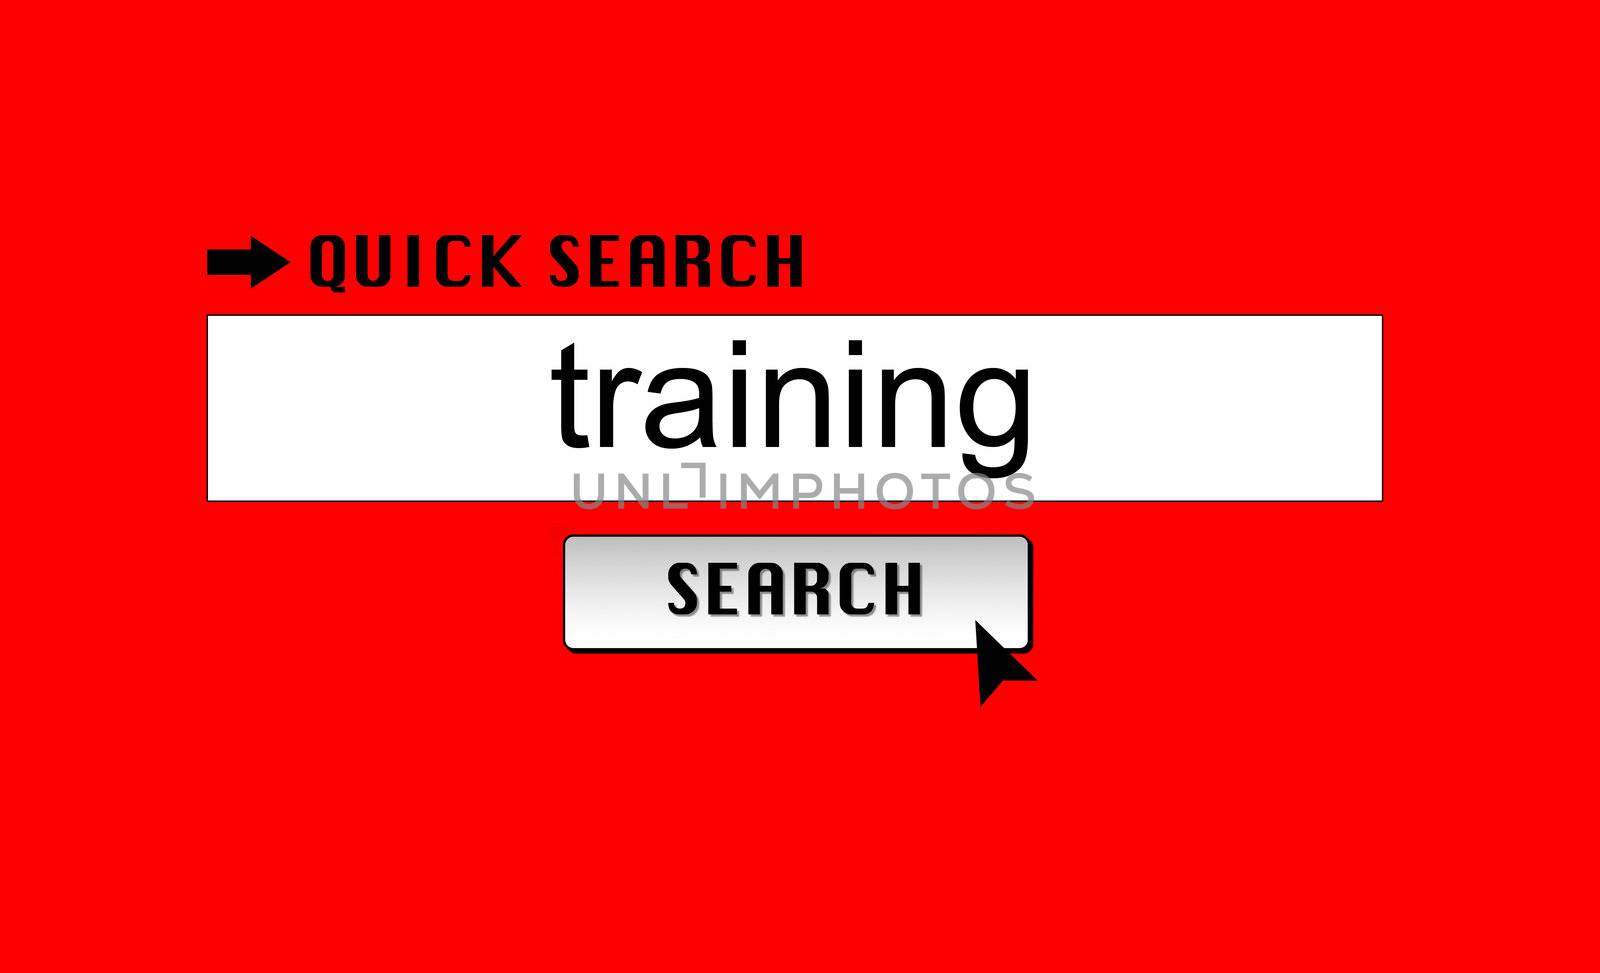 Searching for 'training' in an internet search engine.